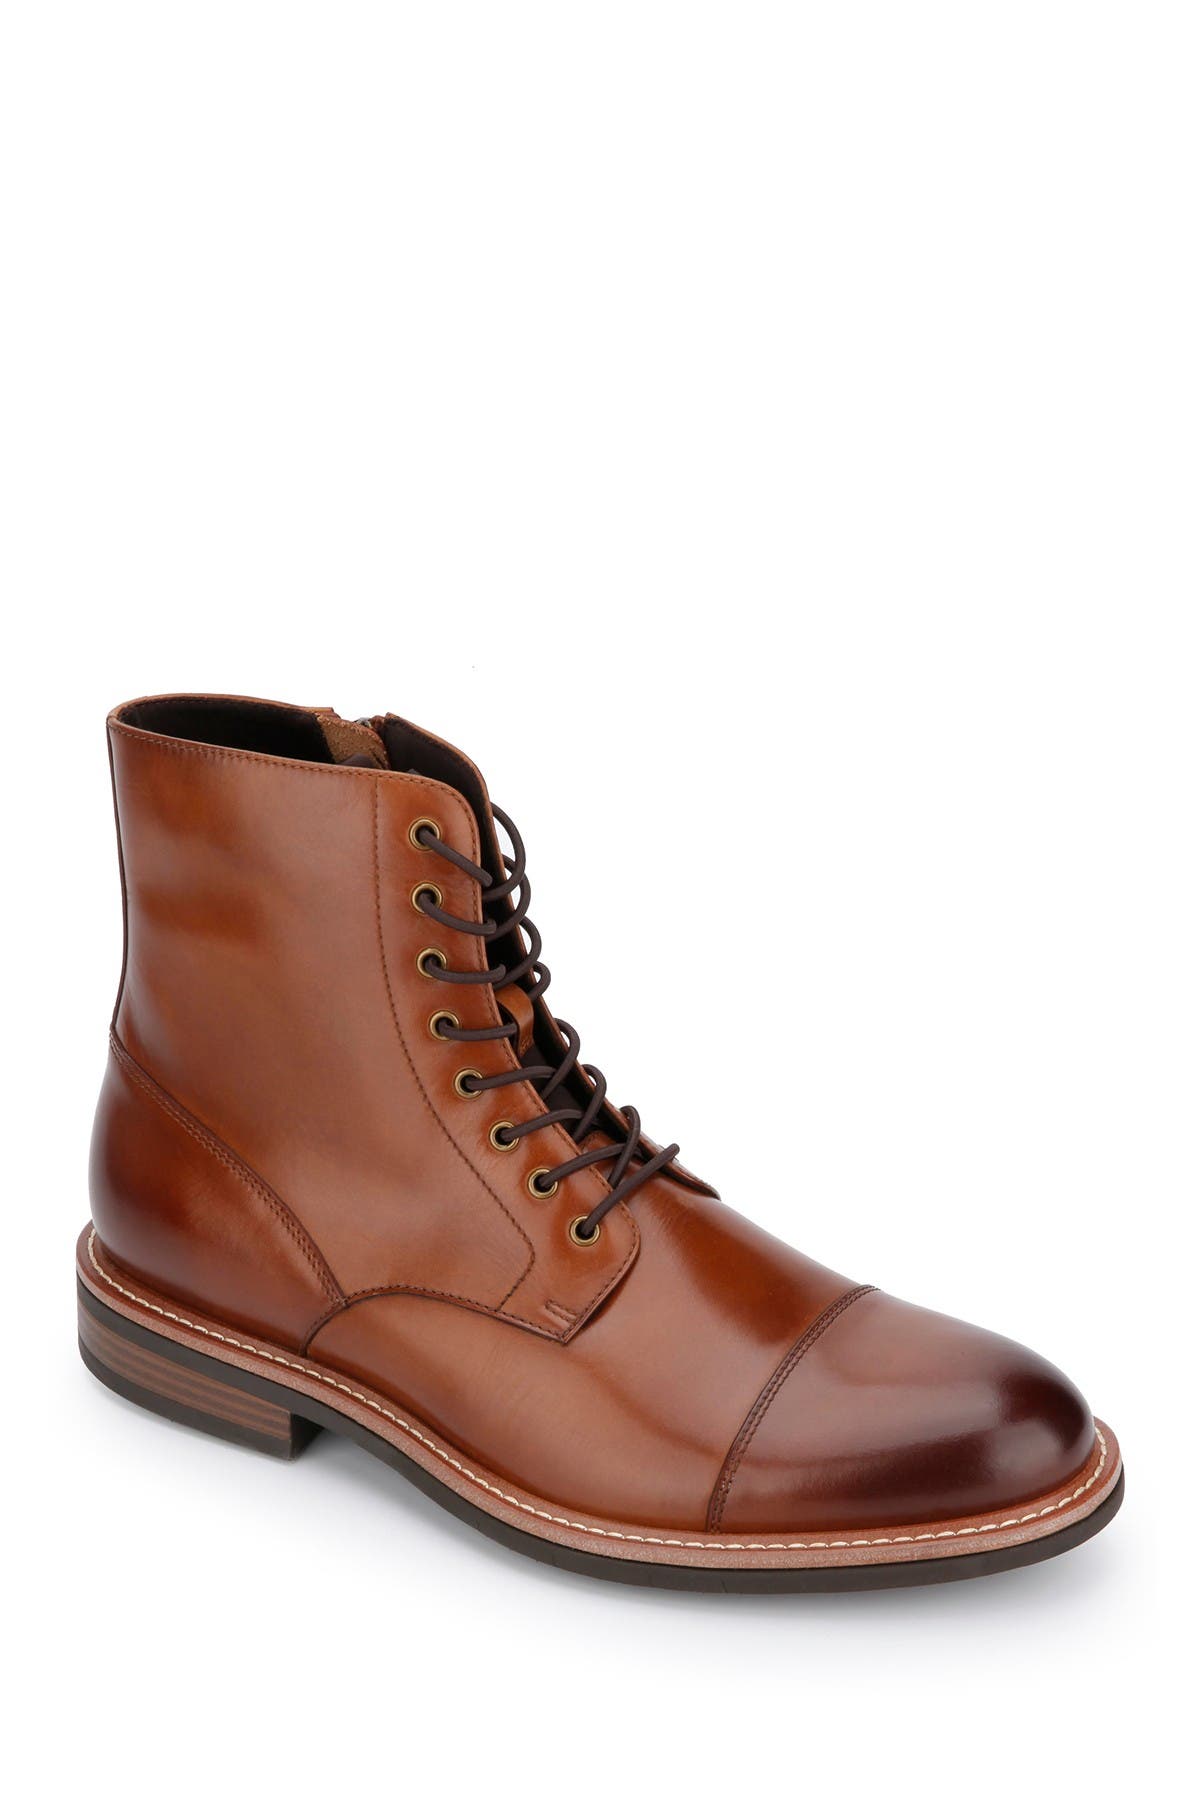 kenneth cole klay boot